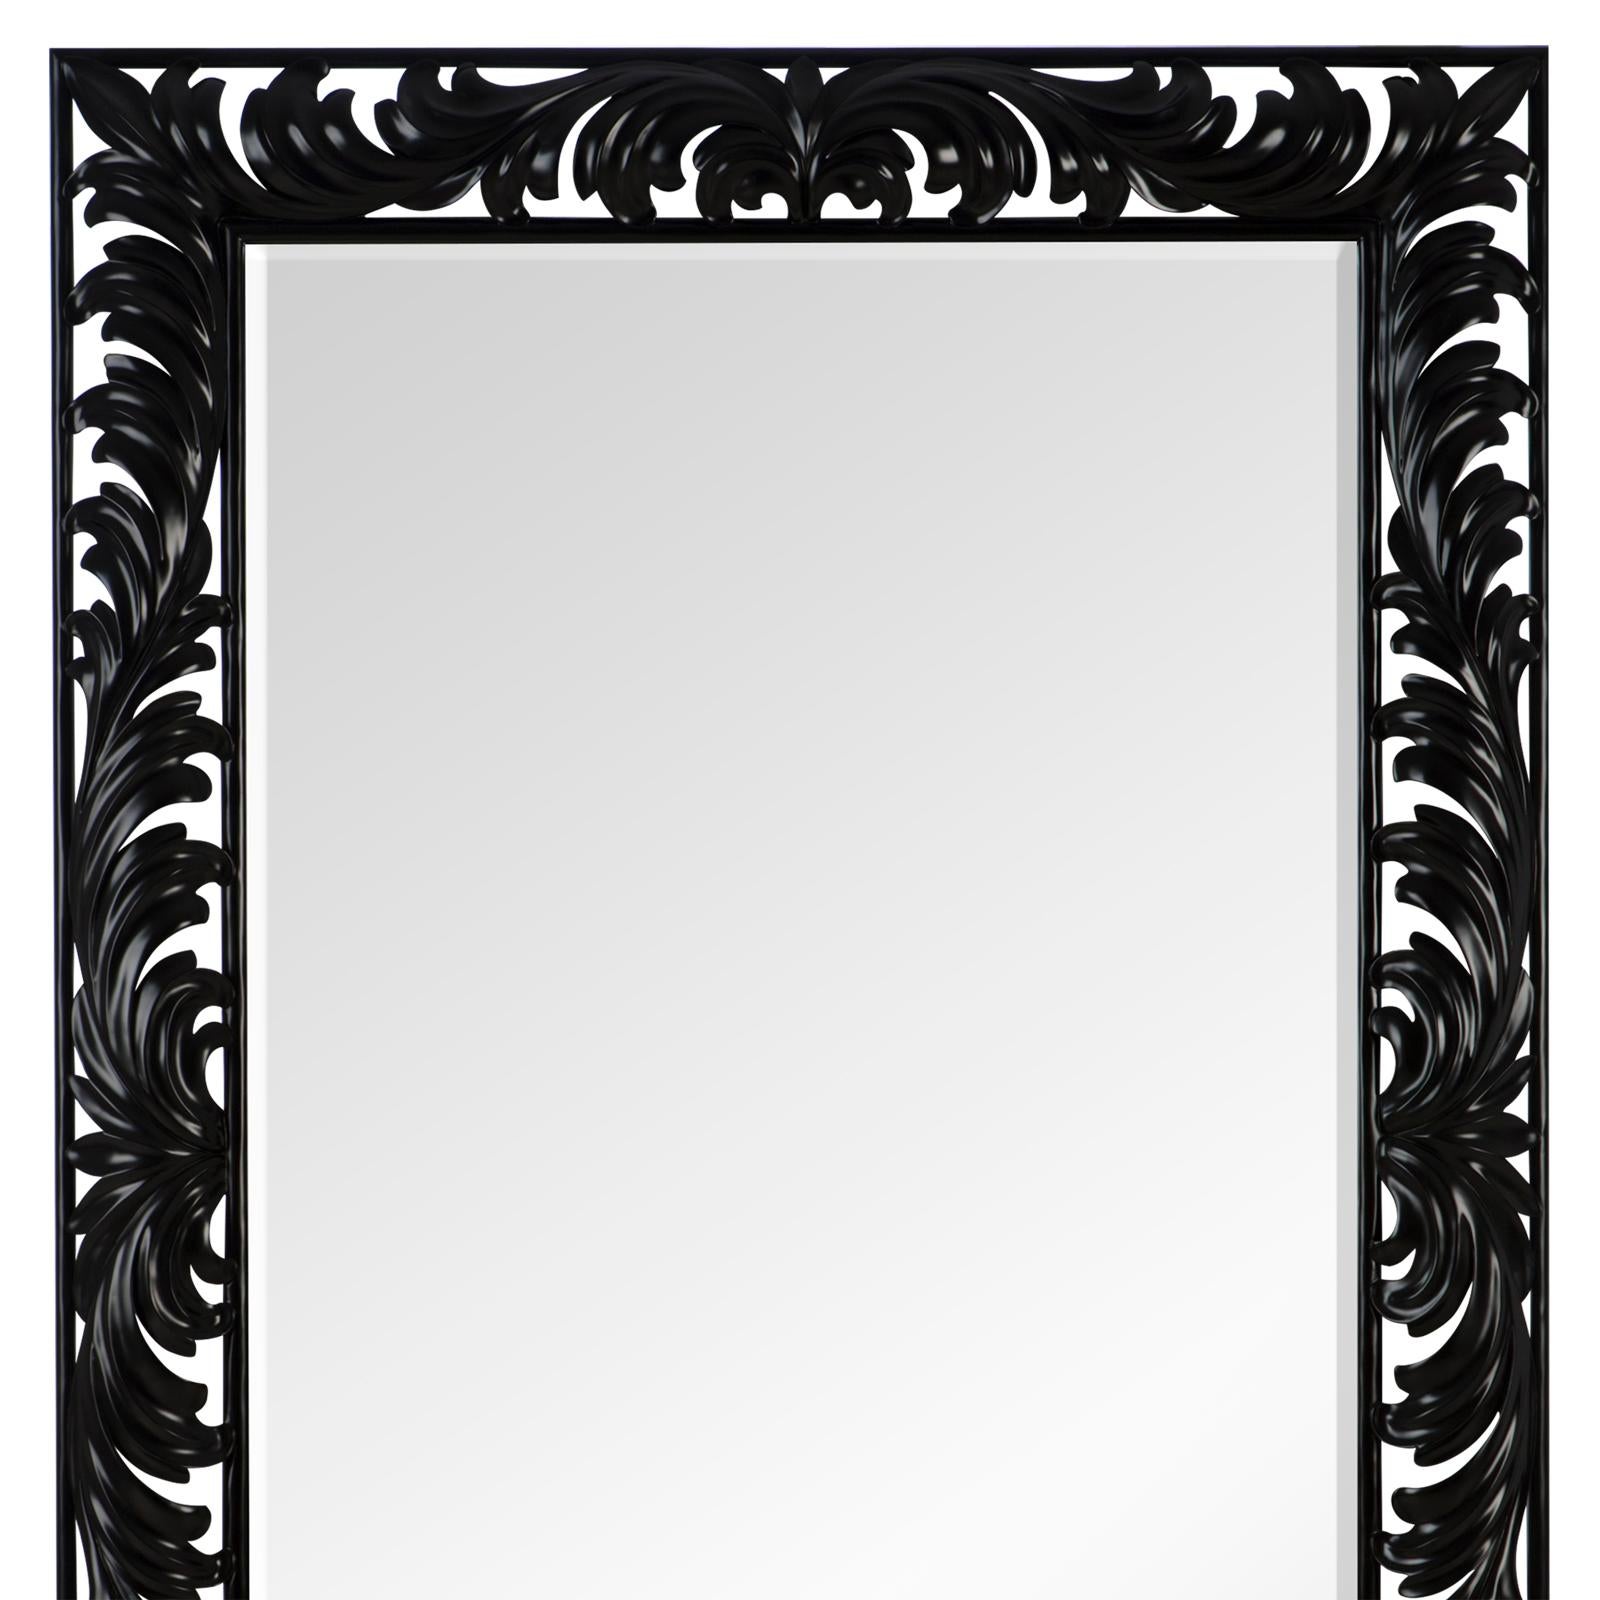 Mirror black Roman with frame in solid hand carved
wood with finish in black satin. With bevelled mirror
glass.
Also available in antique silver or antique gold paint
or in natural tobacco wood finish.
Available in:
L 159 x D 07 x H 231,